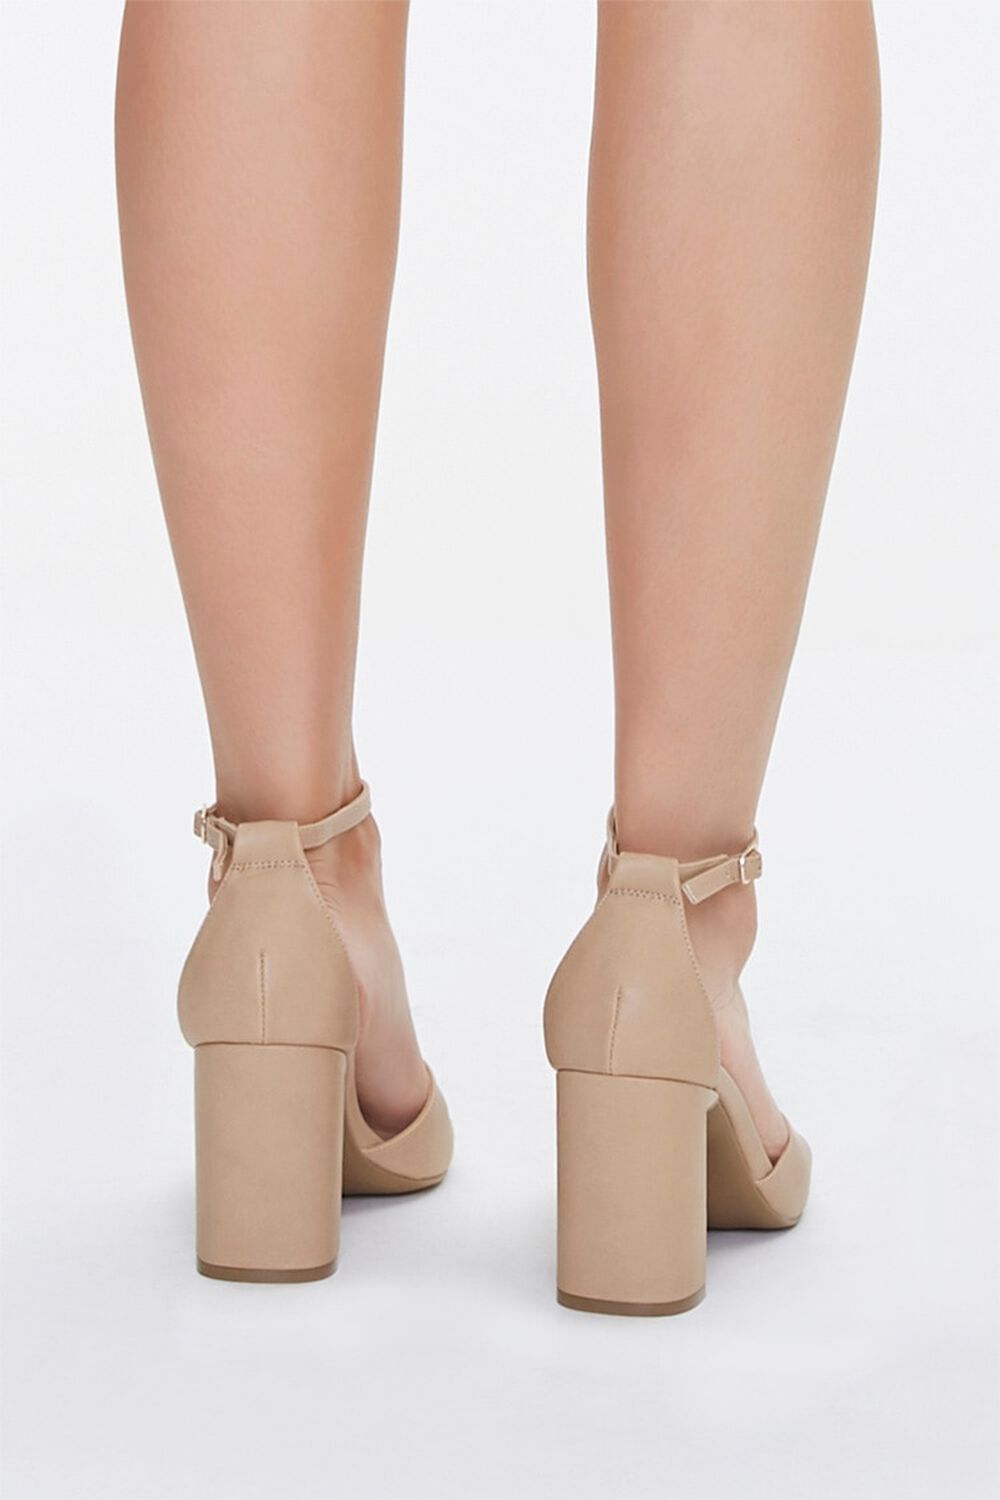 NATURAL Faux Leather Chunky Heels, image 3